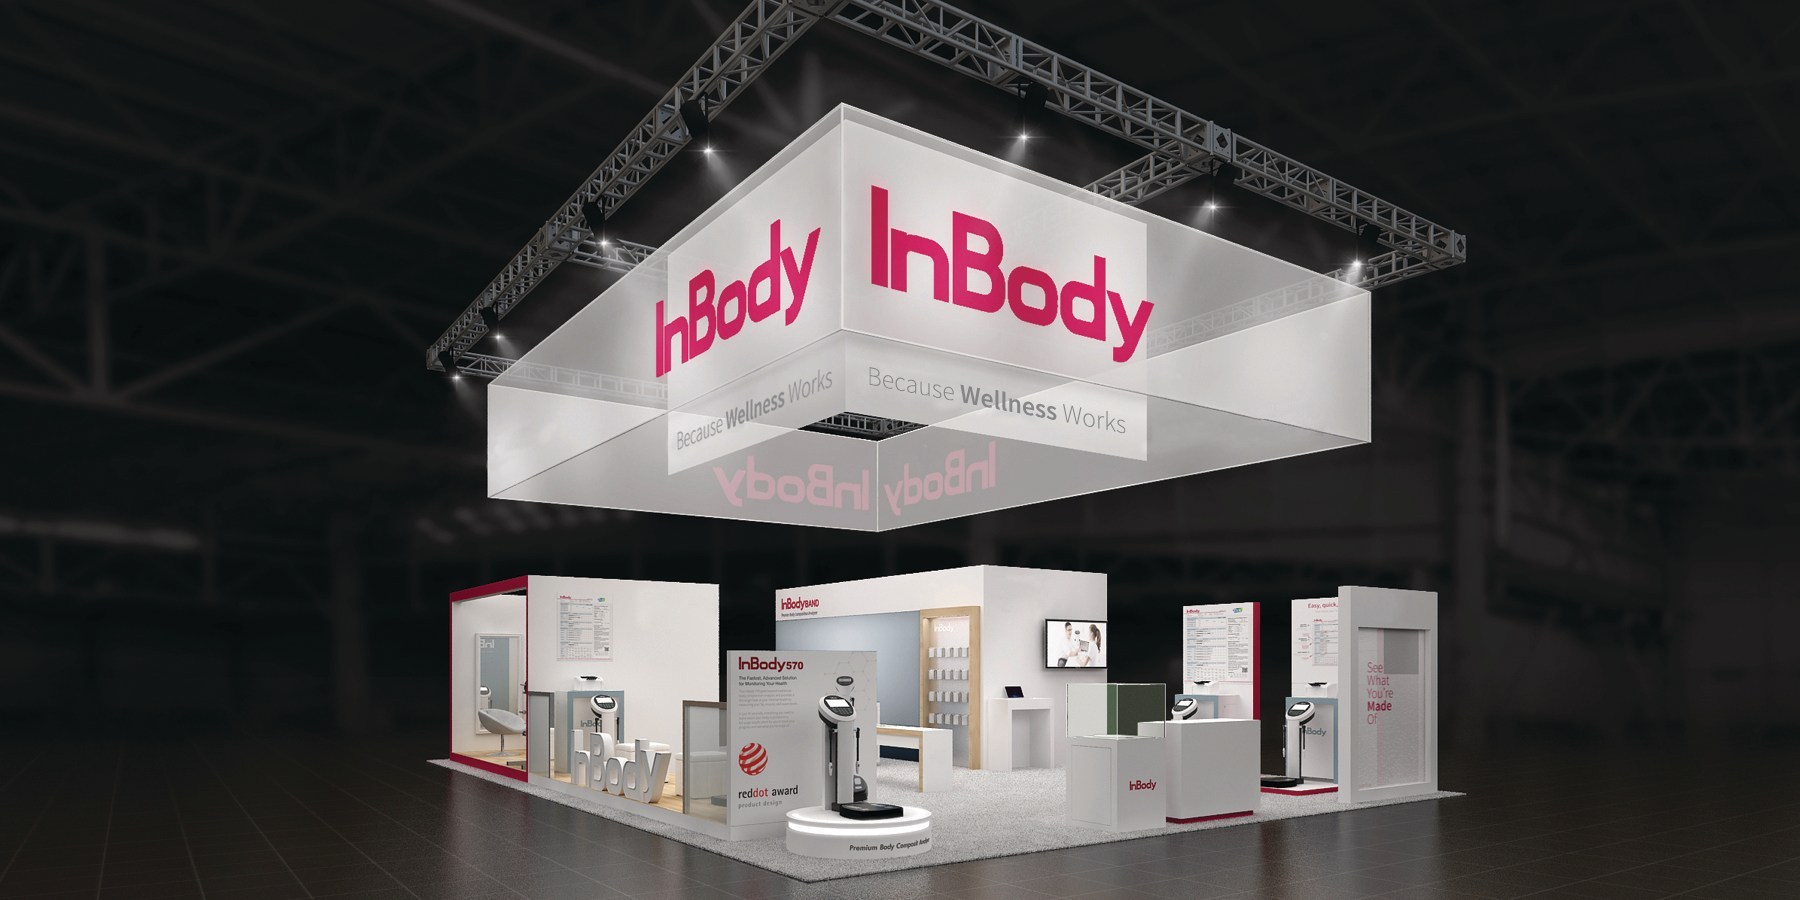 Ces 2017 Inbody To Offer A Tech Fueled Vision Of Modern Day Corporate Wellness